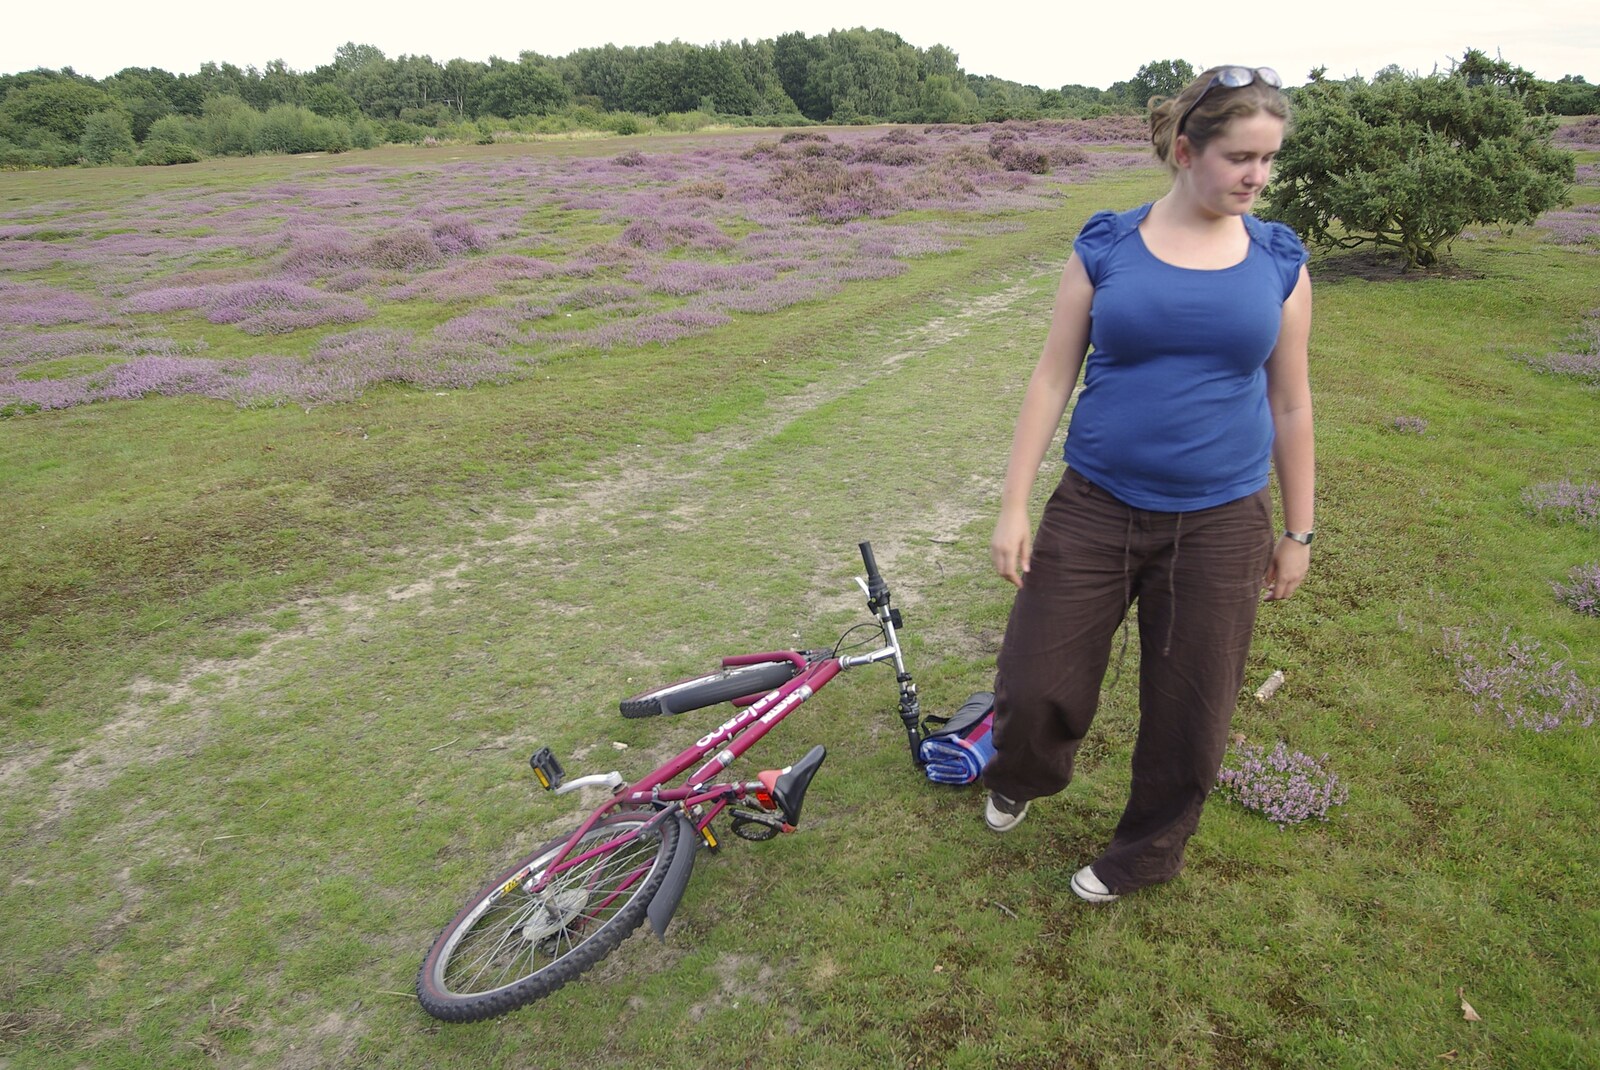 A Picnic on The Ling, Wortham, Suffolk - 26th August 2007: We wander a bit further, and park the bikes by the heather